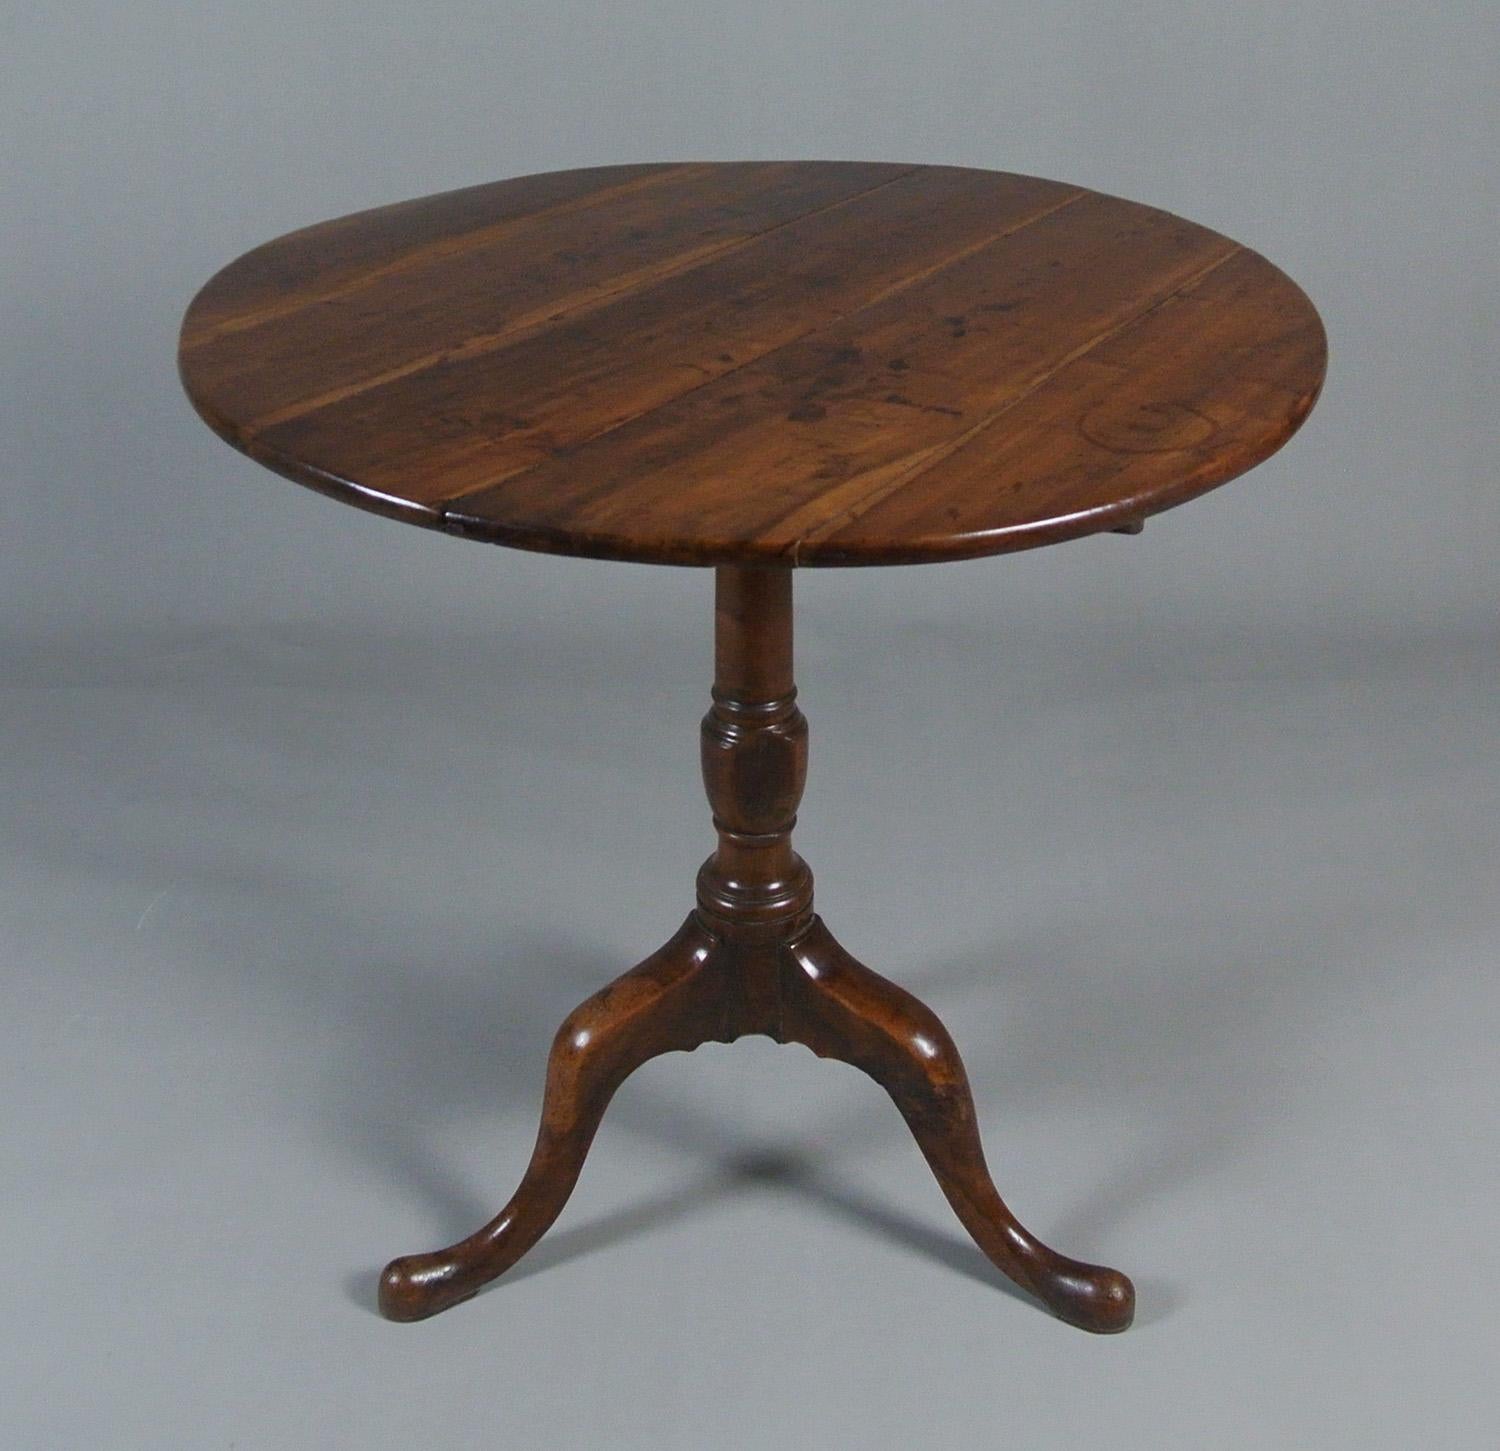 In excellent and original condition, this is a beautiful late 18th century tilt top table in solid yew wood which has developed a truly fabulous colour.

The table is heavy and robust, the top opens smoothly and locks with a simple iron flat plate